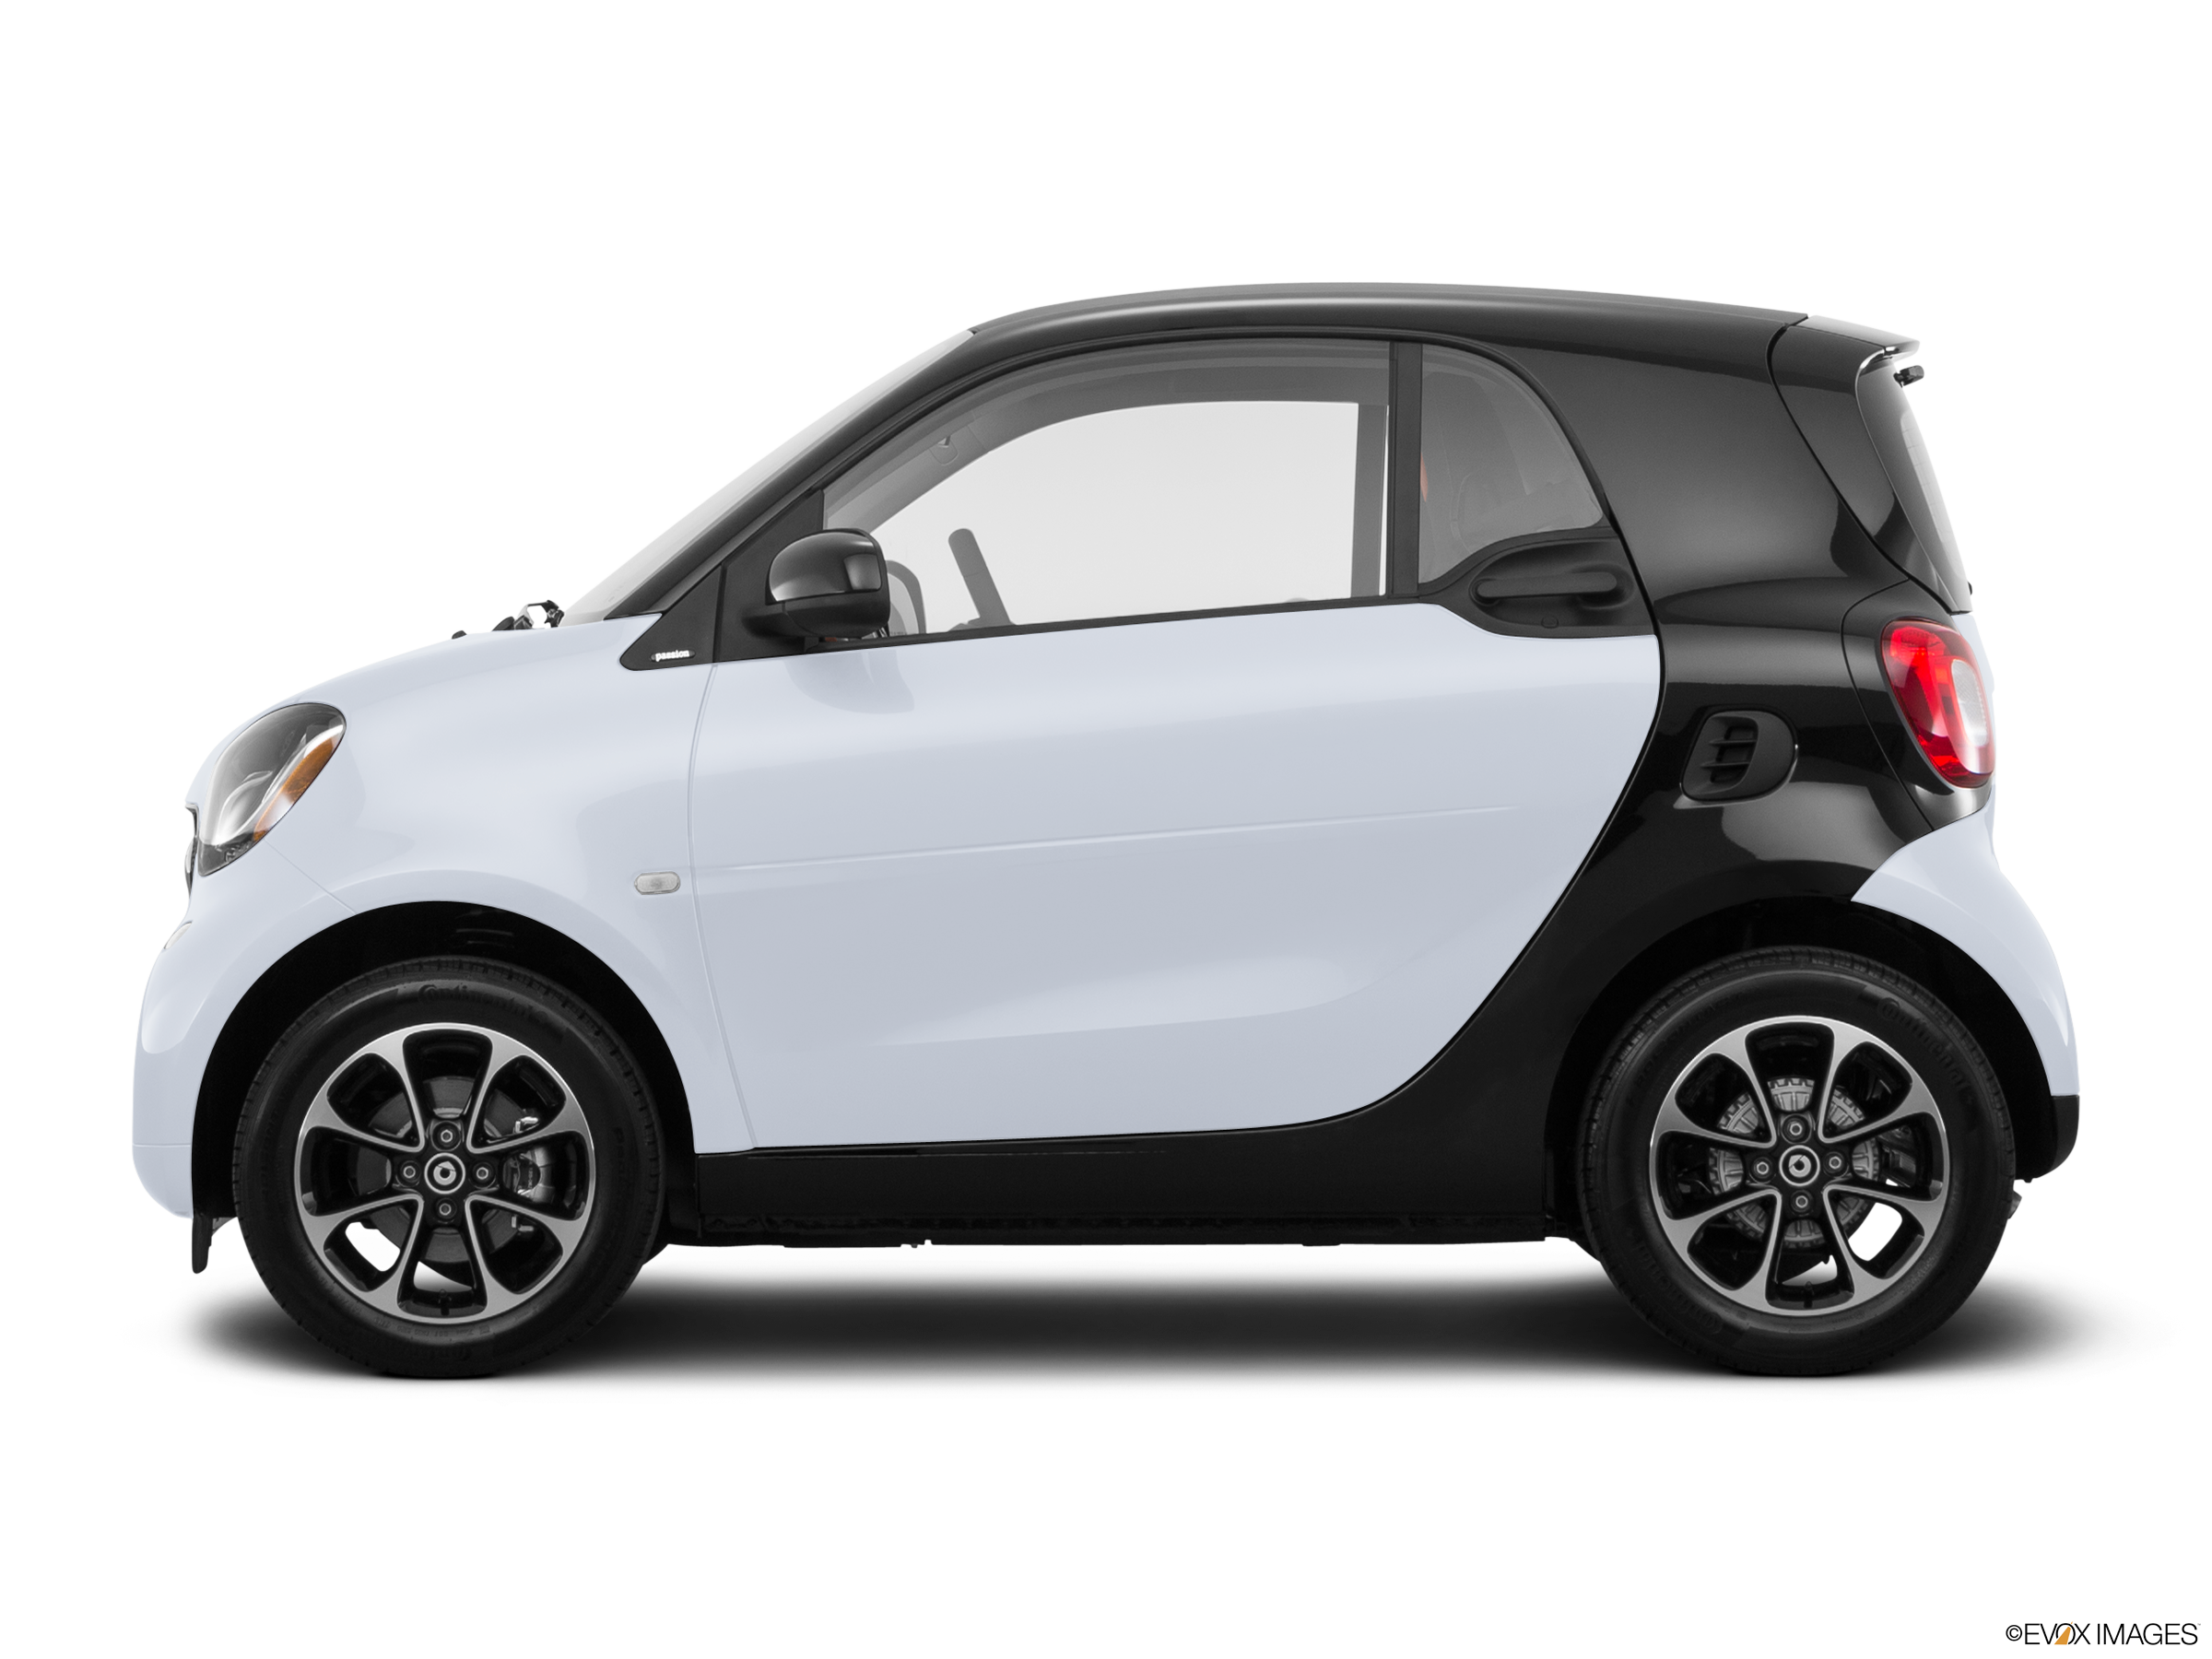 2016 smart fortwo : Latest Prices, Reviews, Specs, Photos and